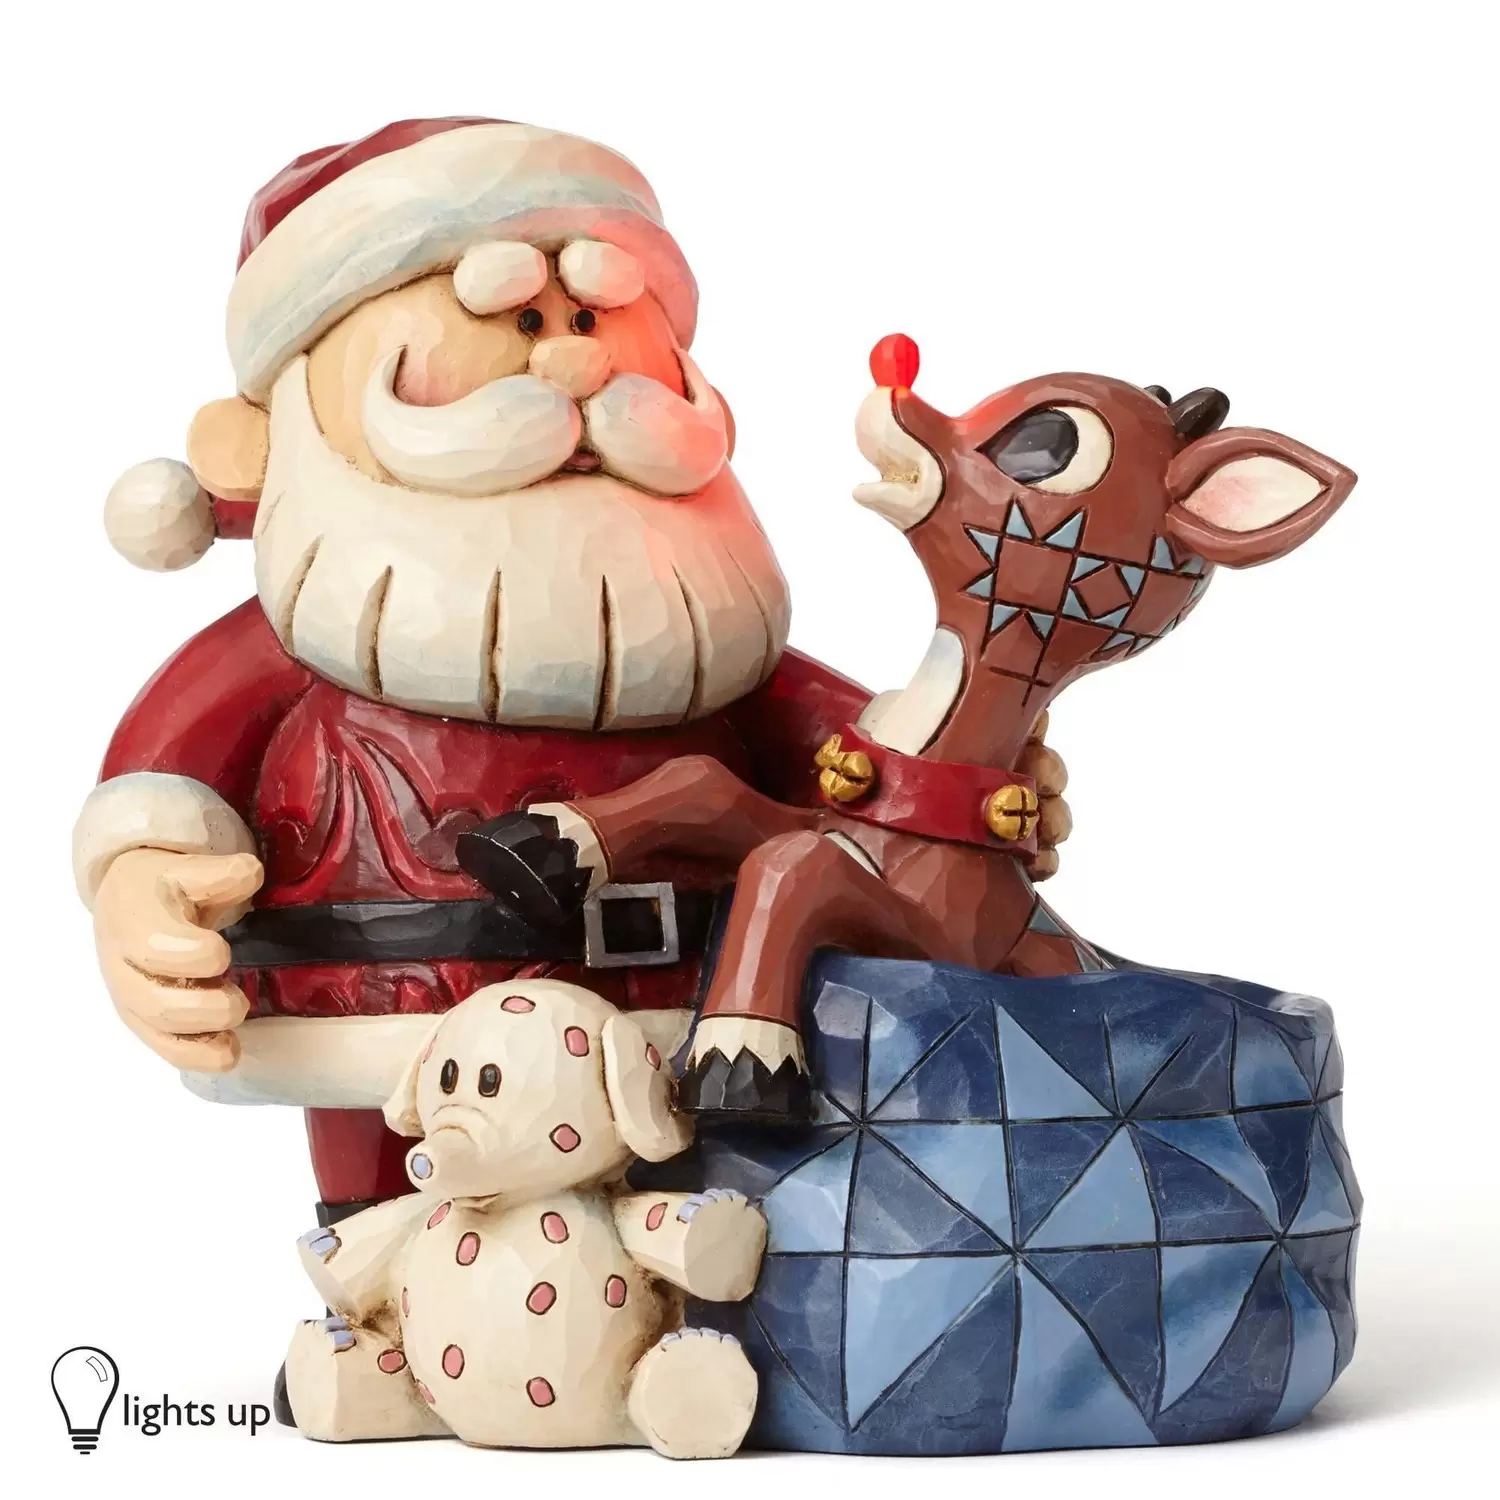 Cartoons Characters by Jim Shore - Santa with Rudolph in Toy Bag